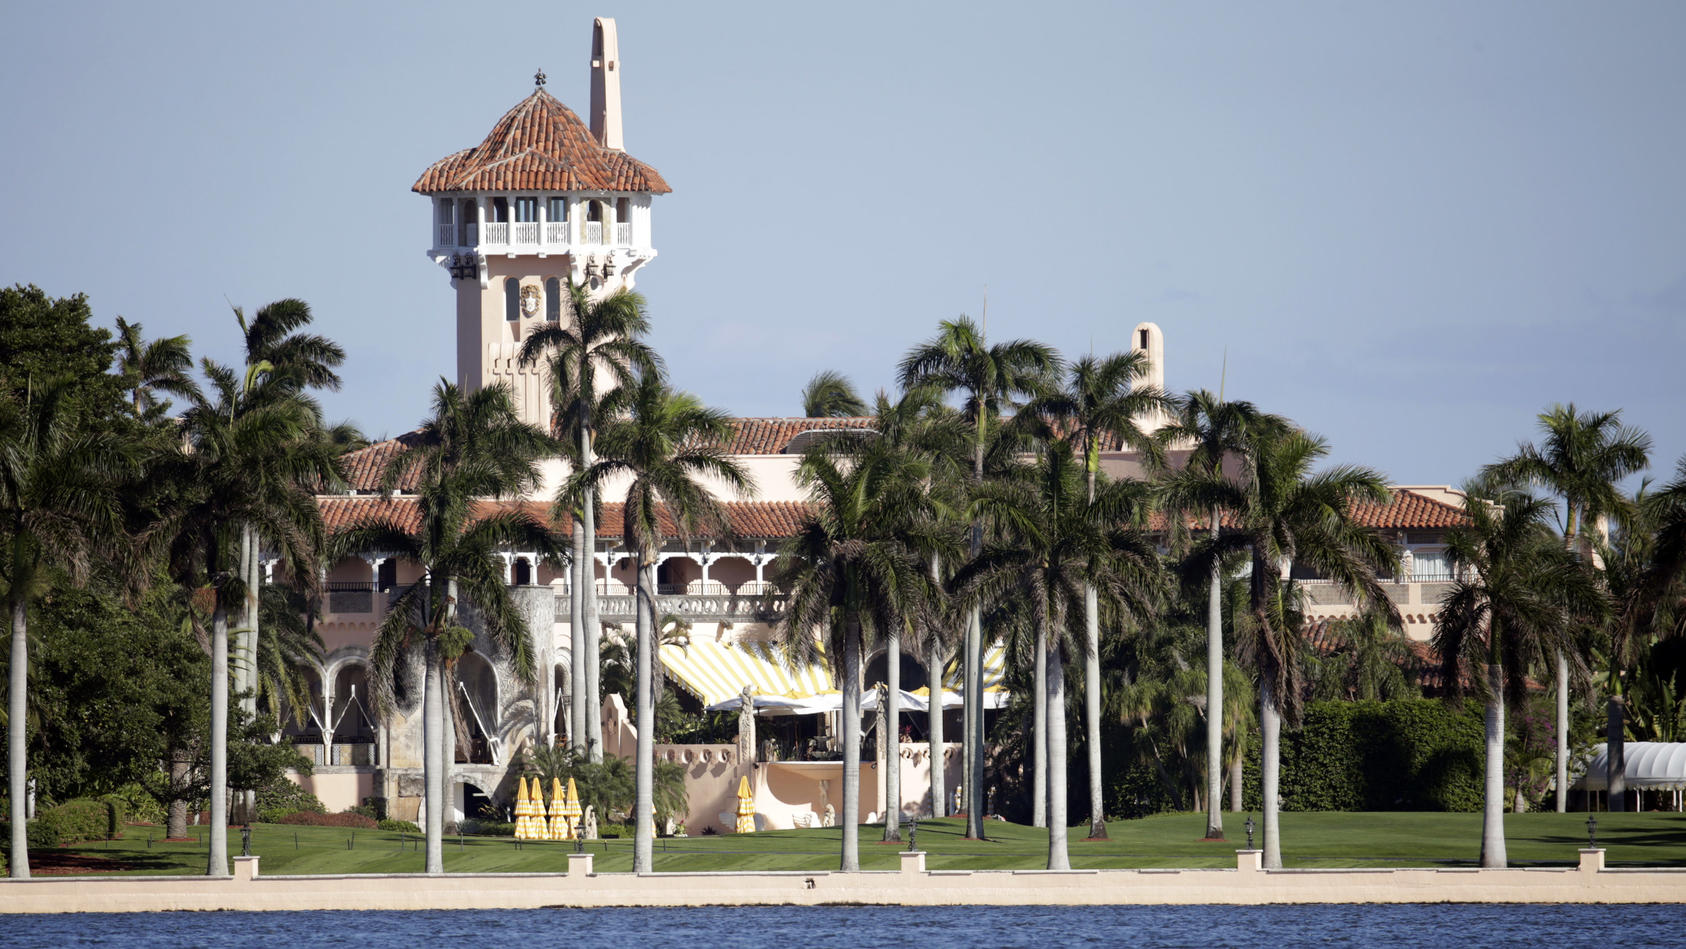 FILE- This Monday, Nov. 21, 2016 file photo, shows the Mar-a-Lago resort owned by President-elect Donald Trump in Palm Beach, Fla. Three teenagers are facing felony charges after police said Wednesday, Aug. 5, 2020, they jumped a wall at President Do